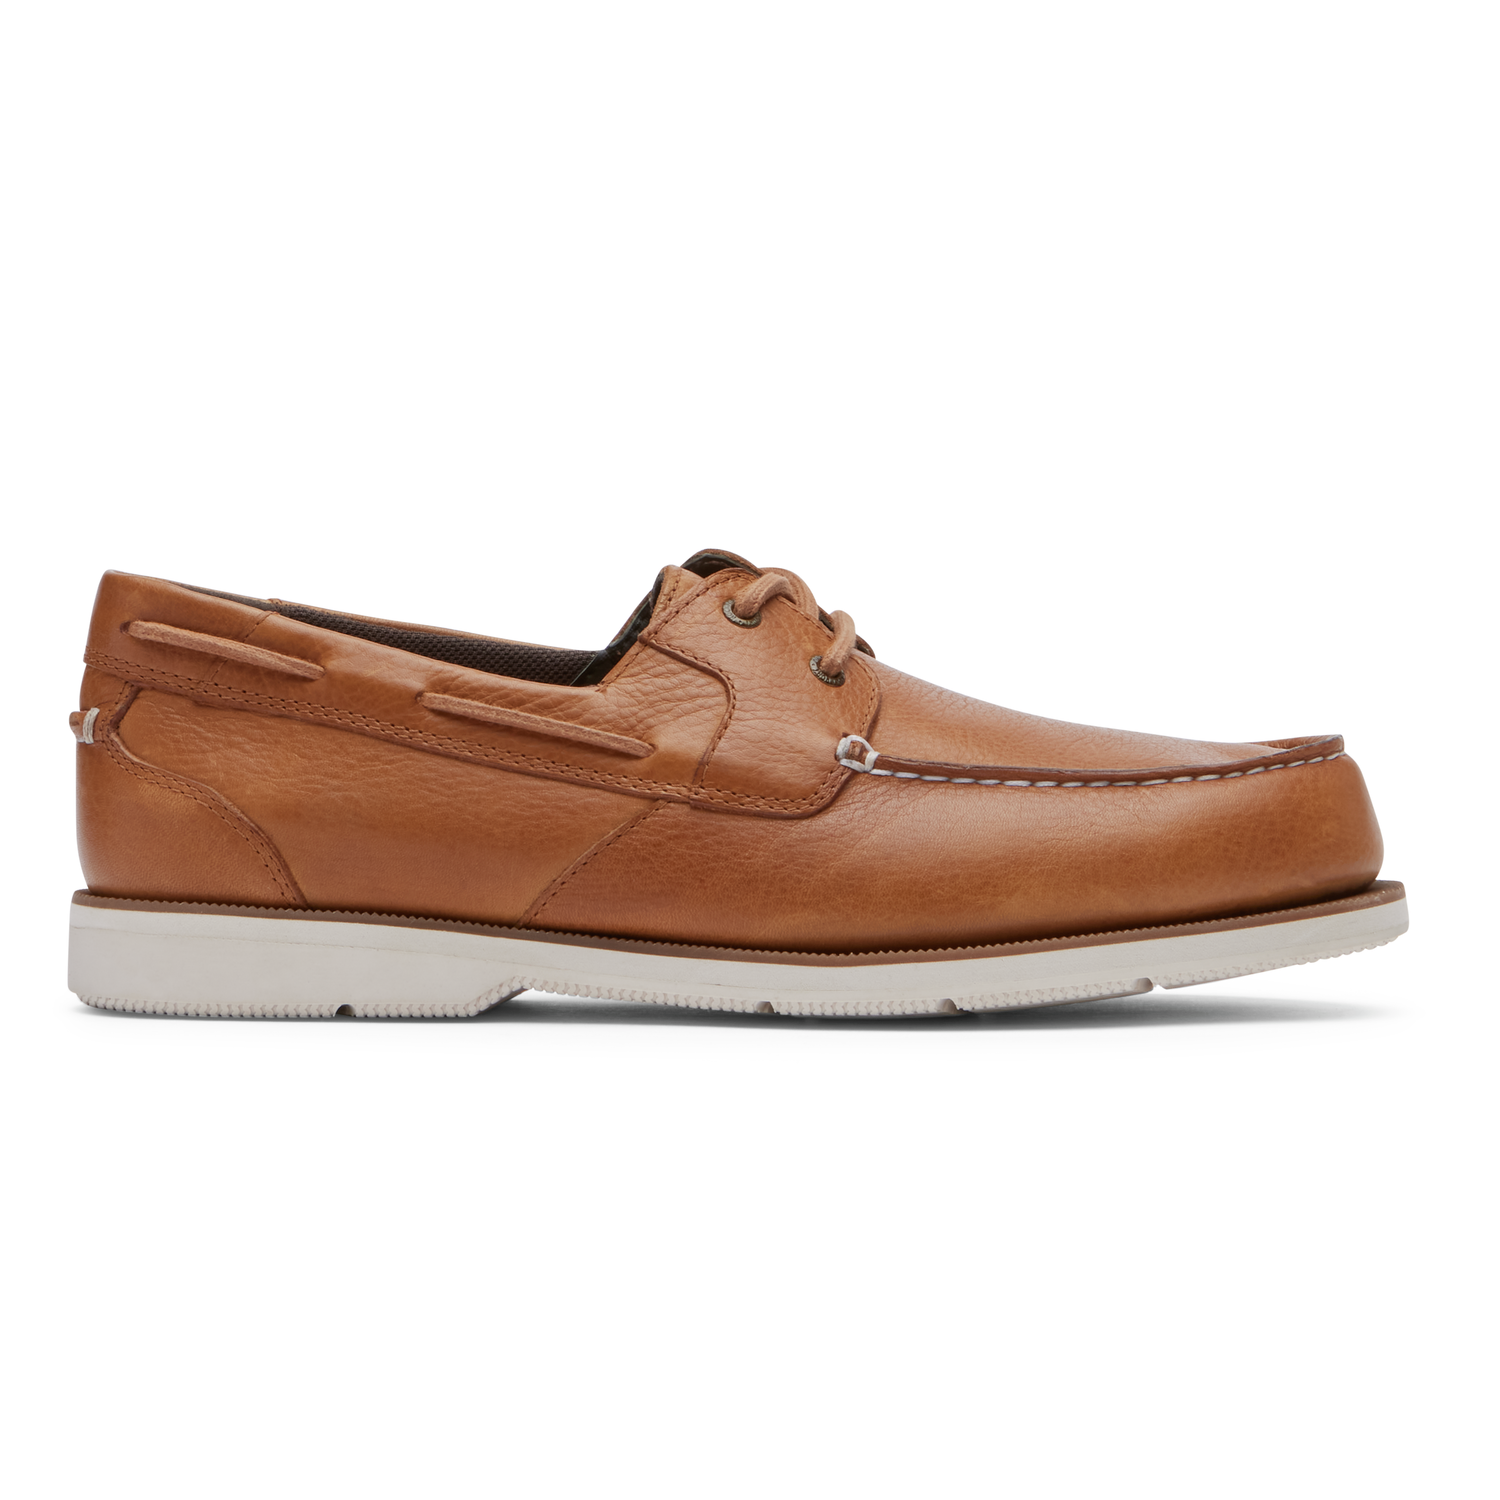 Men's Southport Tie Loafer